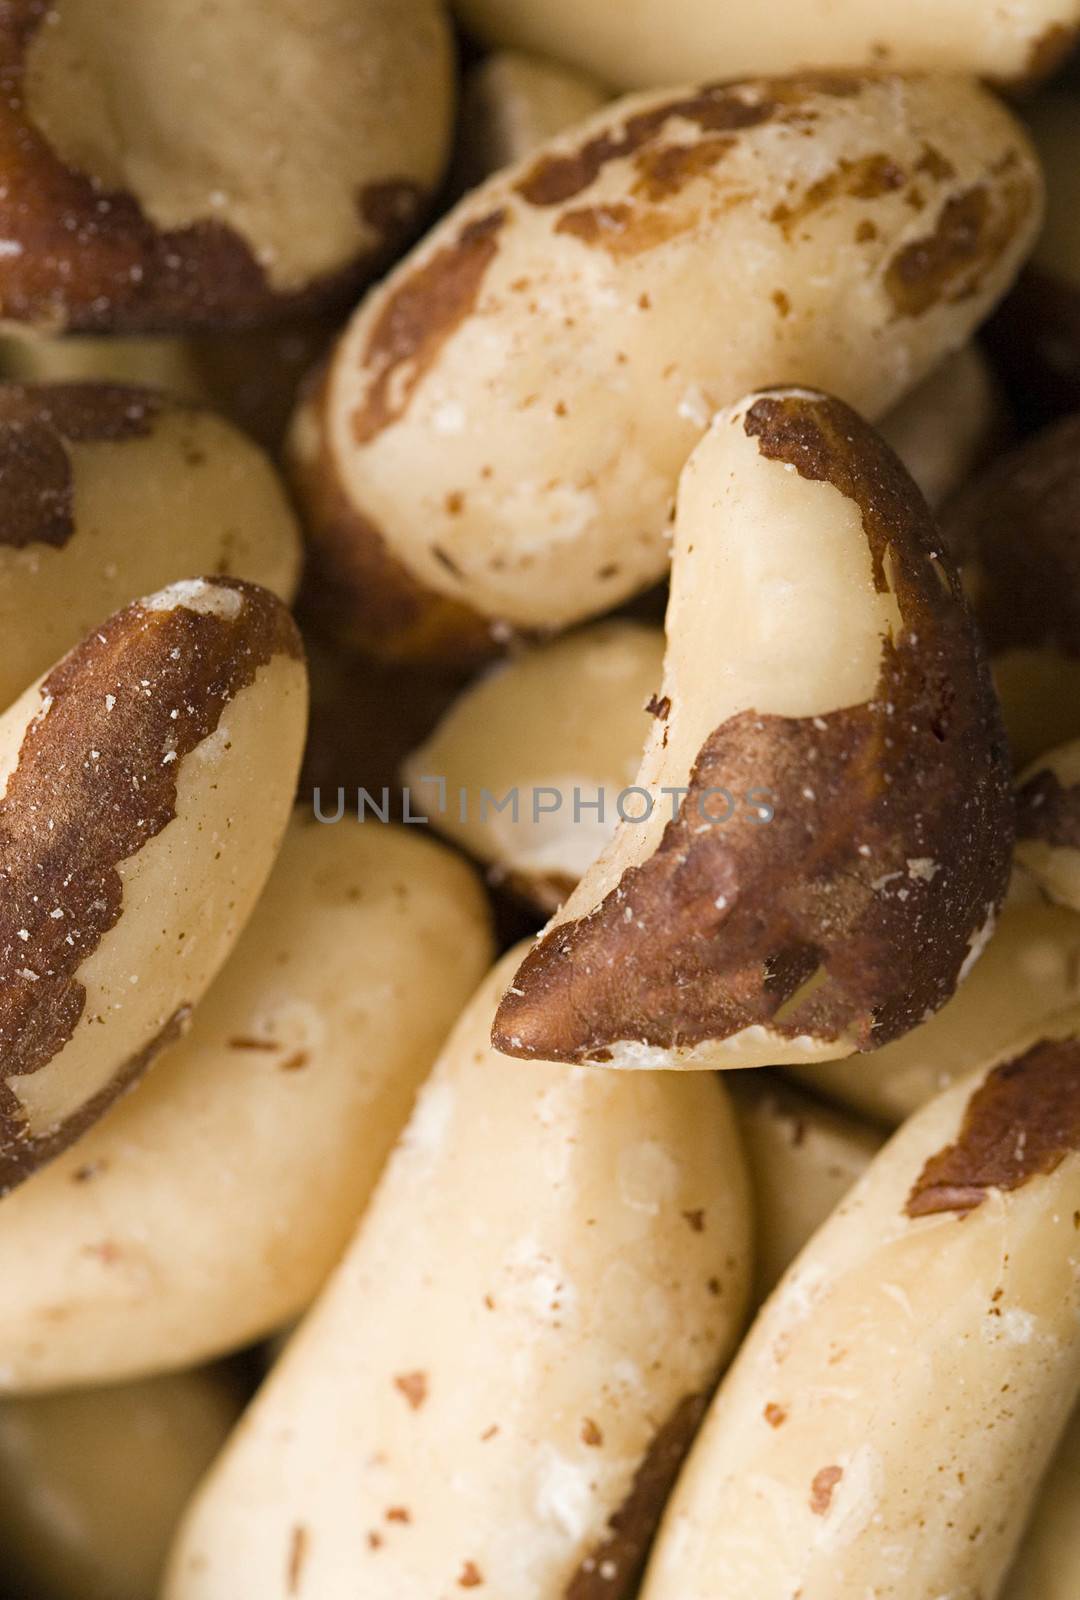 Extreme close-up image of peanuts by shutswis